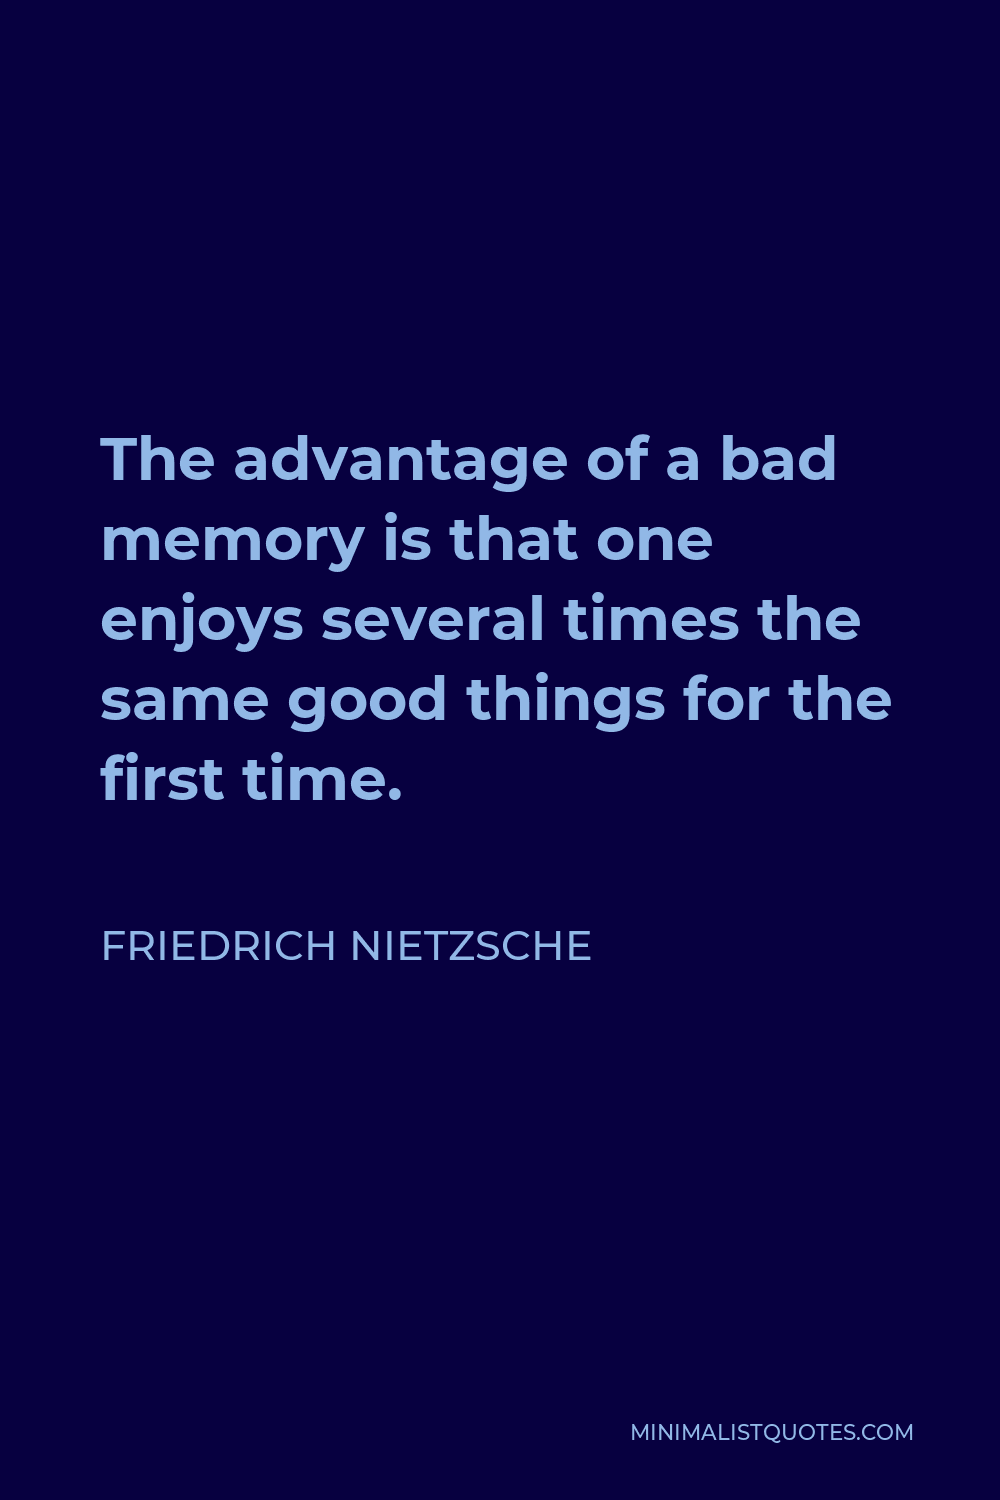 Friedrich Nietzsche Quote - The advantage of a bad memory is that one enjoys several times the same good things for the first time.